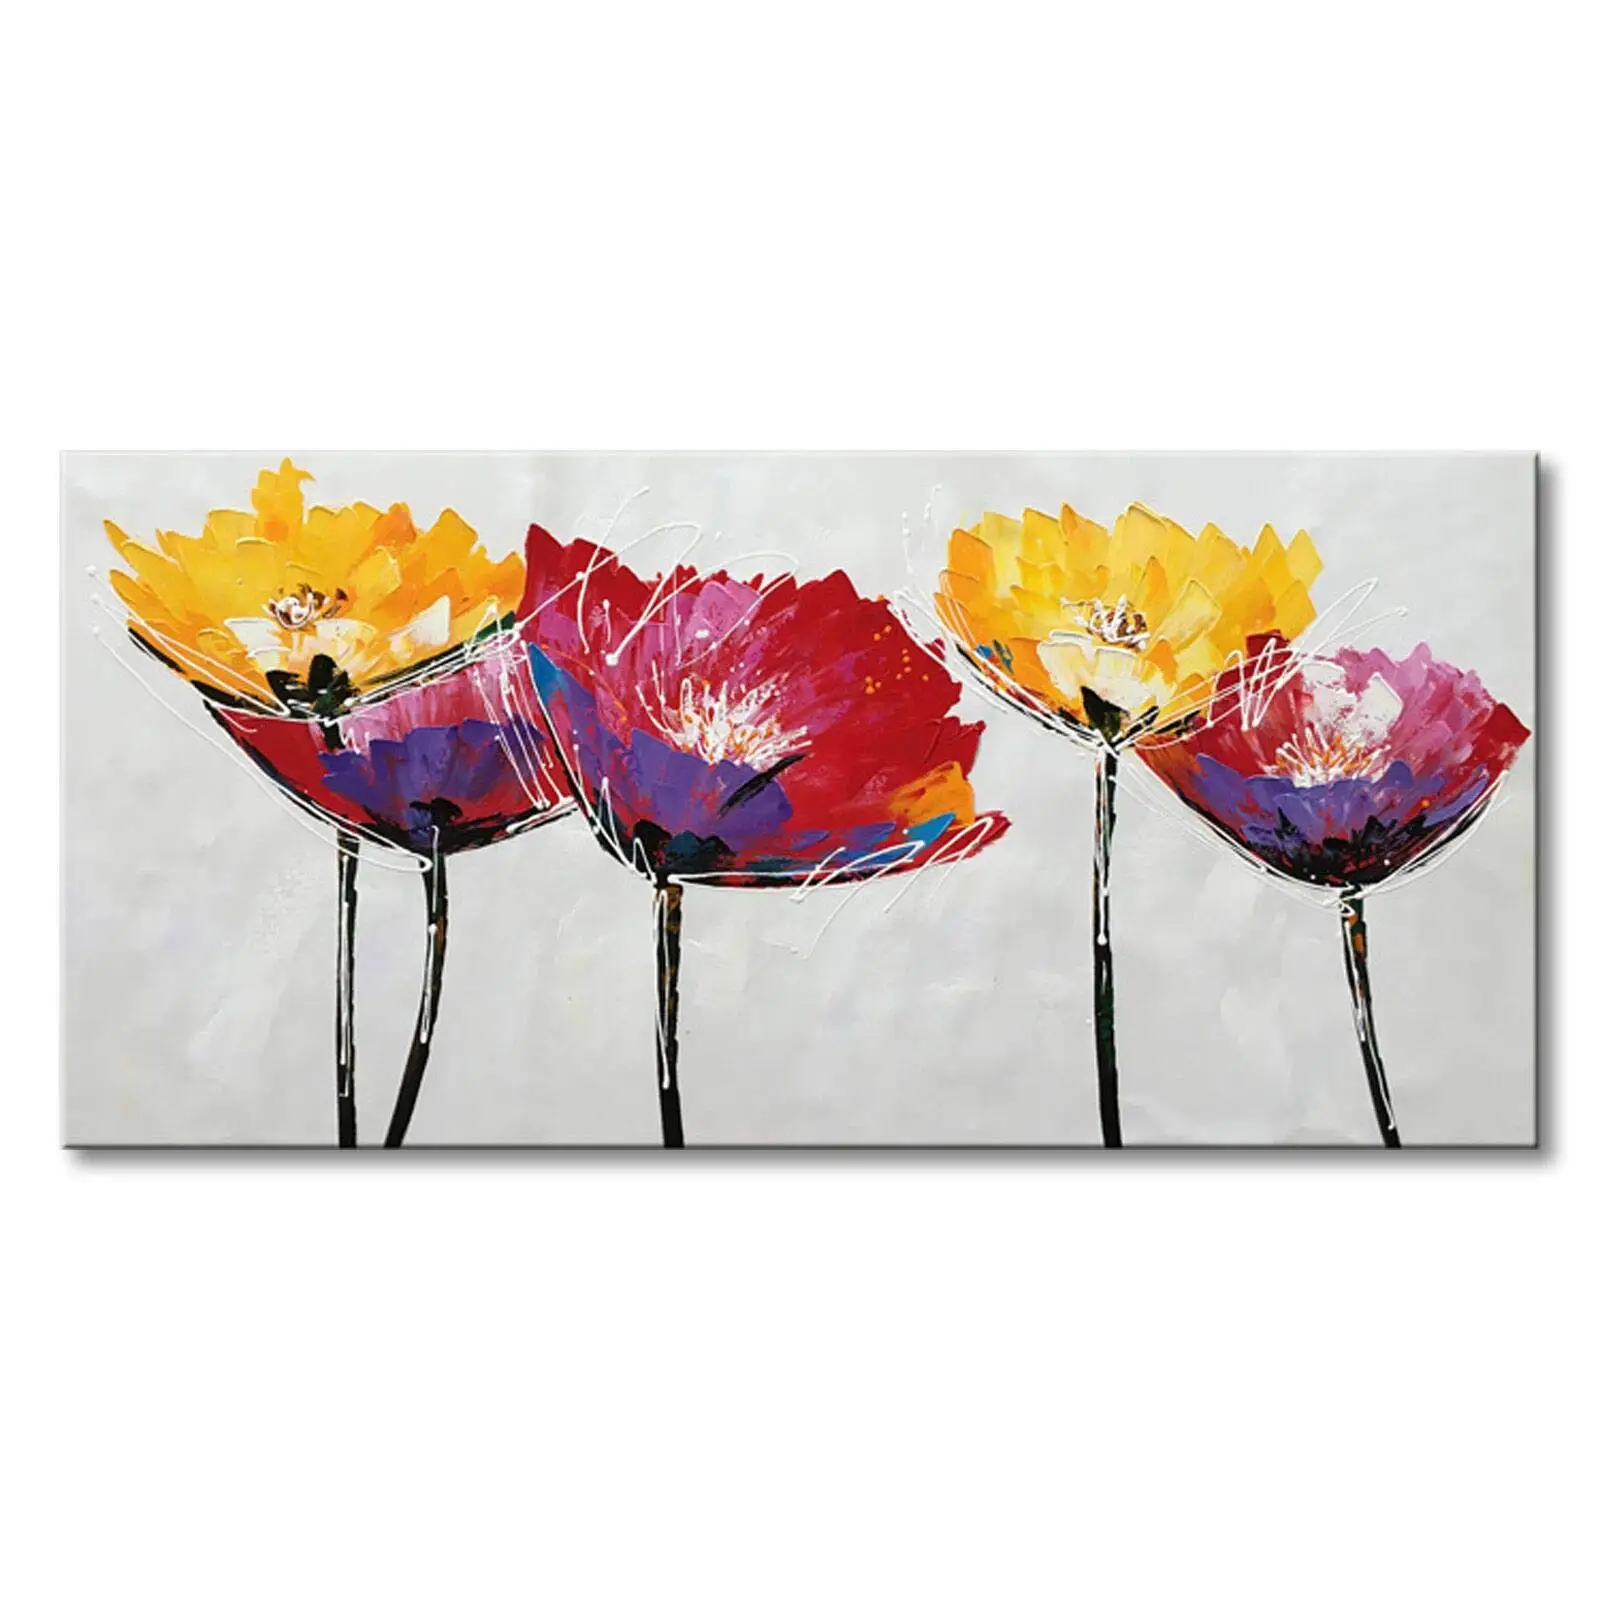 

Hand Painted Modern Flower Oil Painting on Canvas Abstract Wall Art Colorful Floral Decor Hanging Contemporary Artwork No Framed